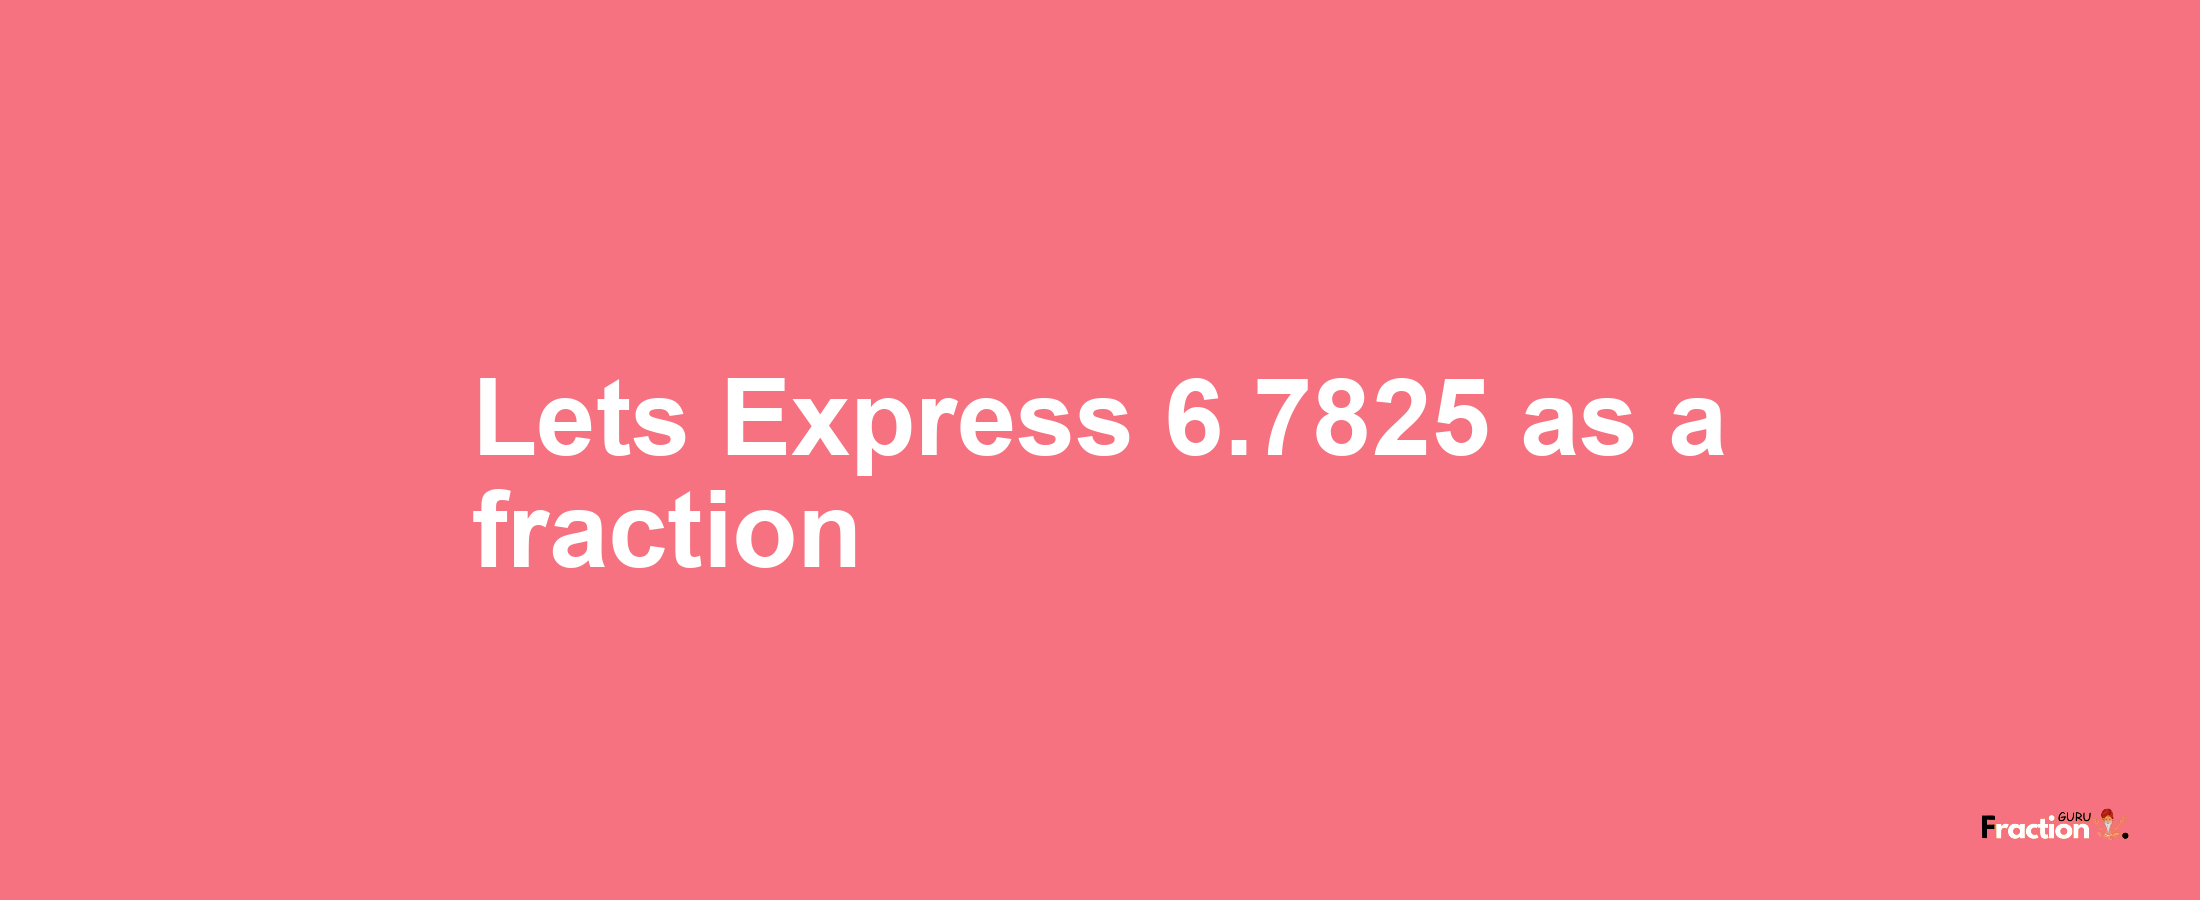 Lets Express 6.7825 as afraction